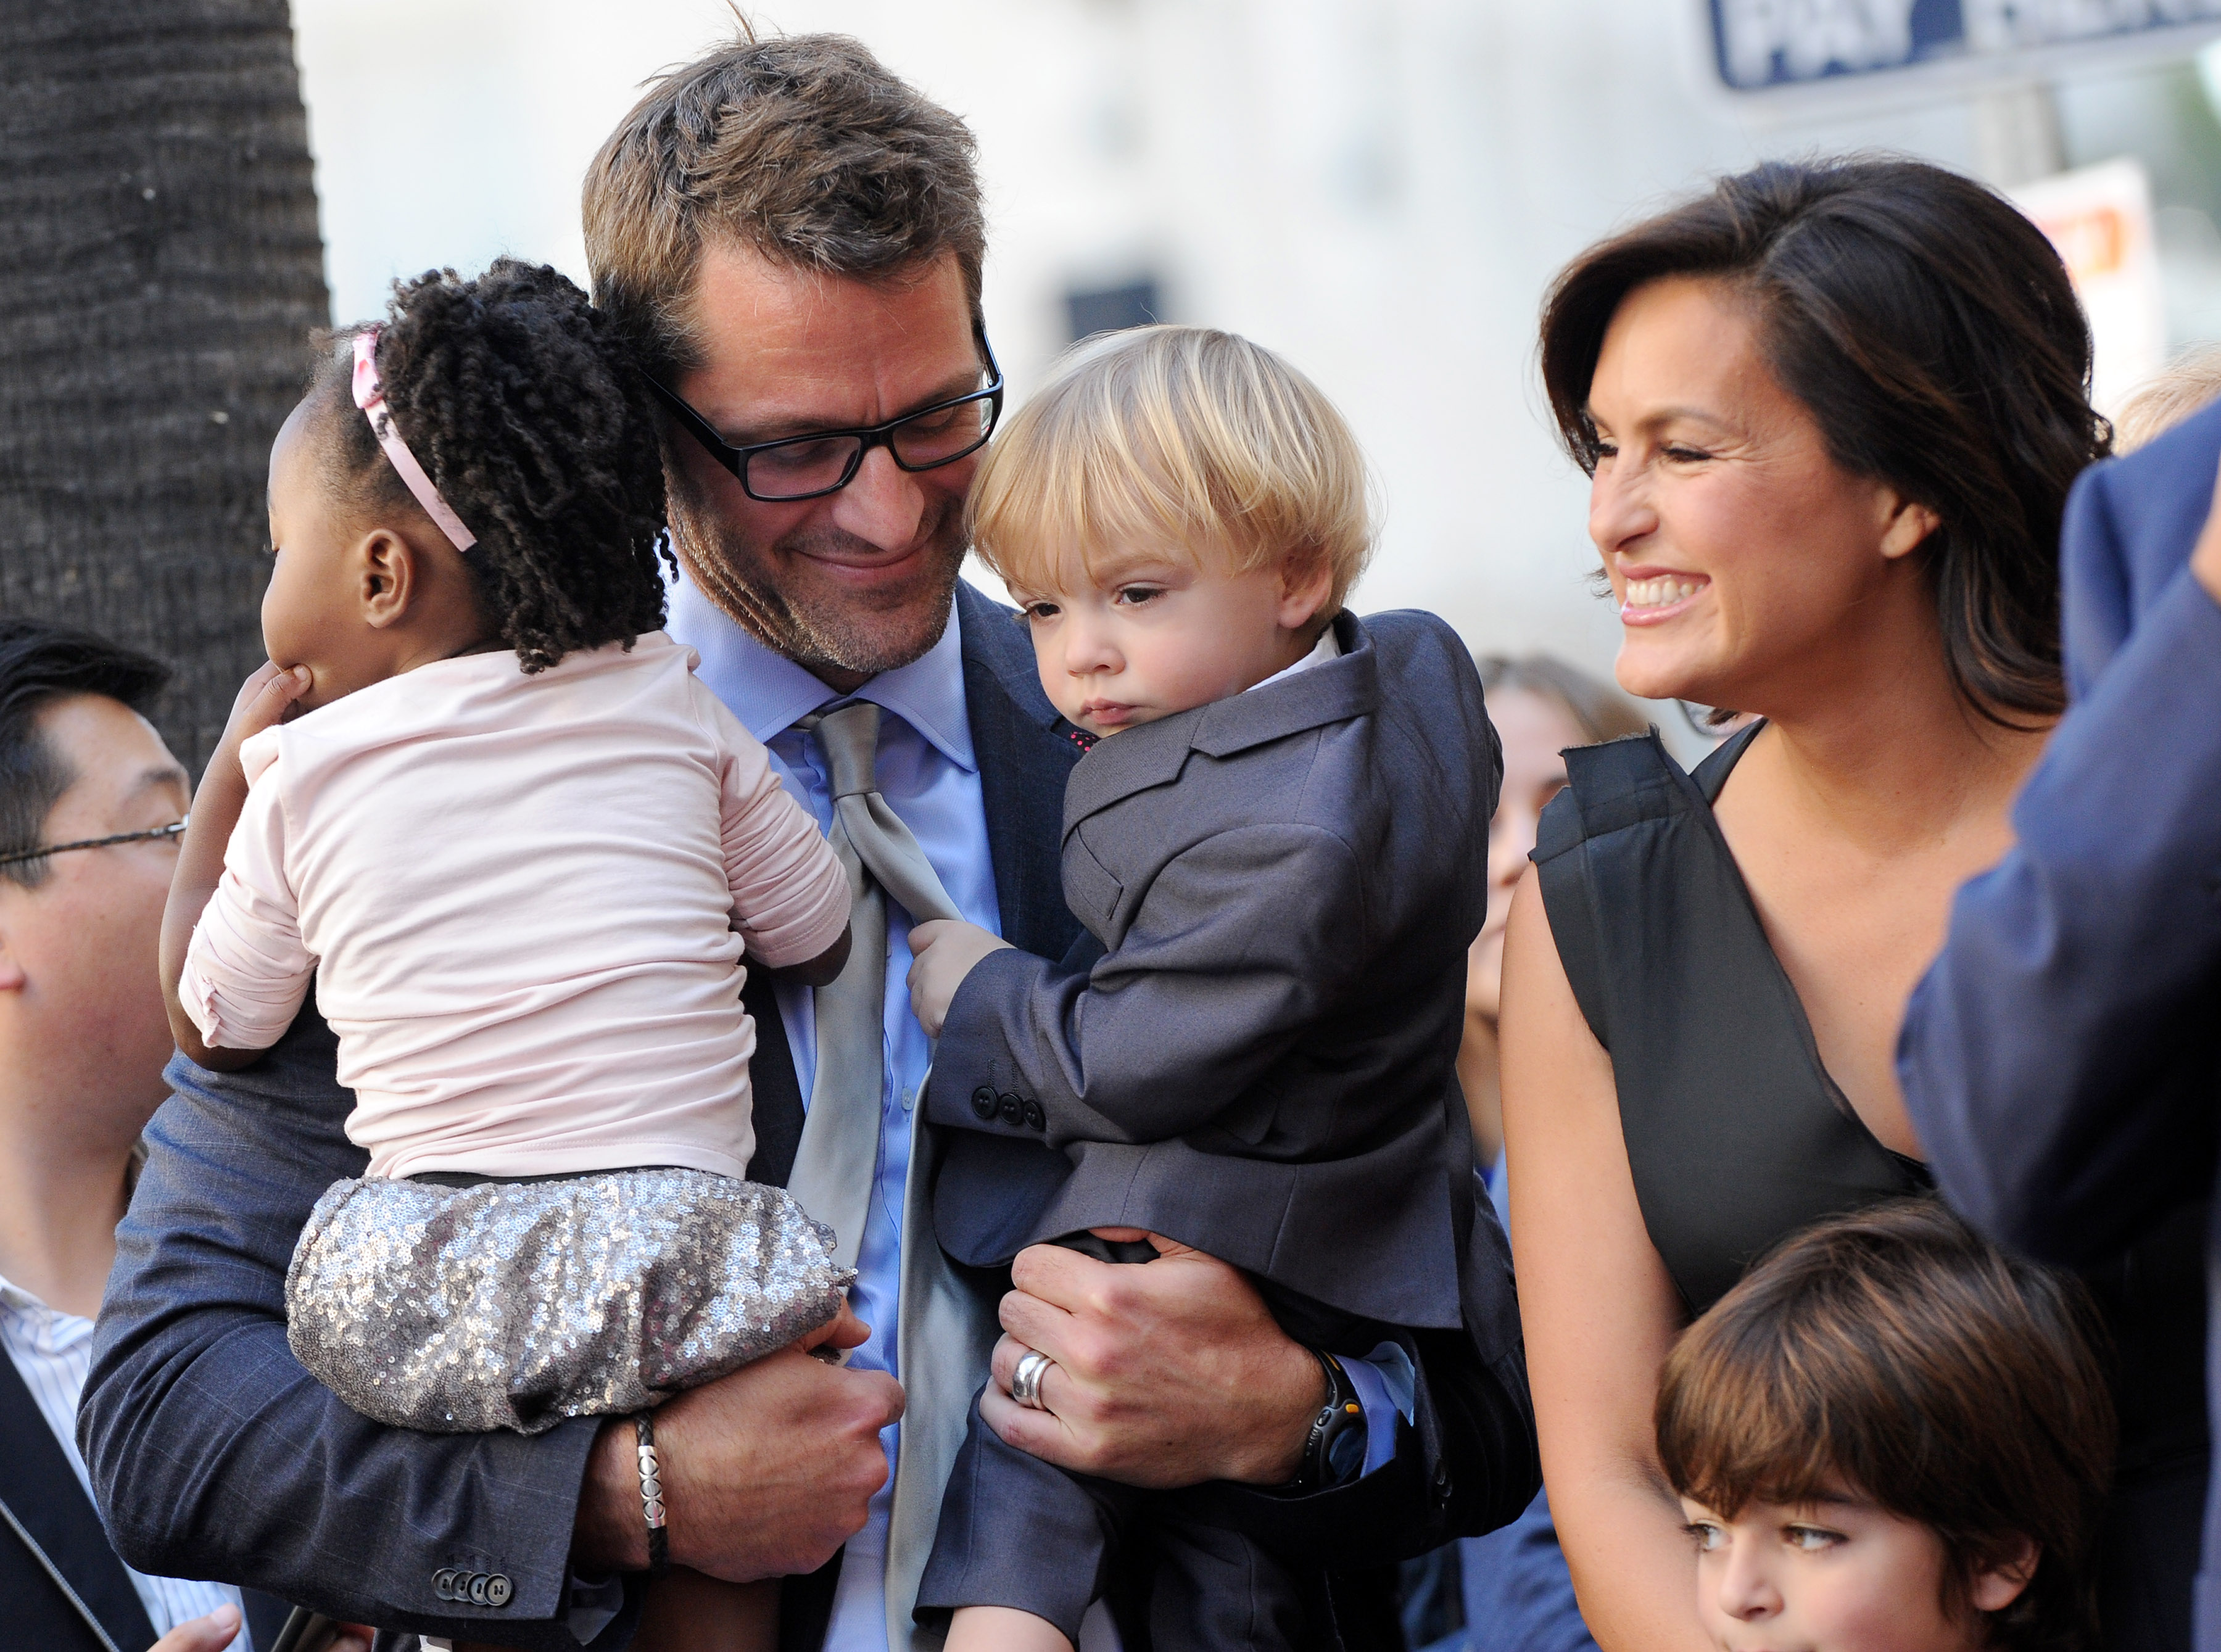 Mariska Hargitay accompanied by her husband Peter Hermann, daughter Amaya and sons Andrew and August as she gets a Hollywood Walk of Fame star on November 8, 2013 in Hollywood, California | Source: Getty Images